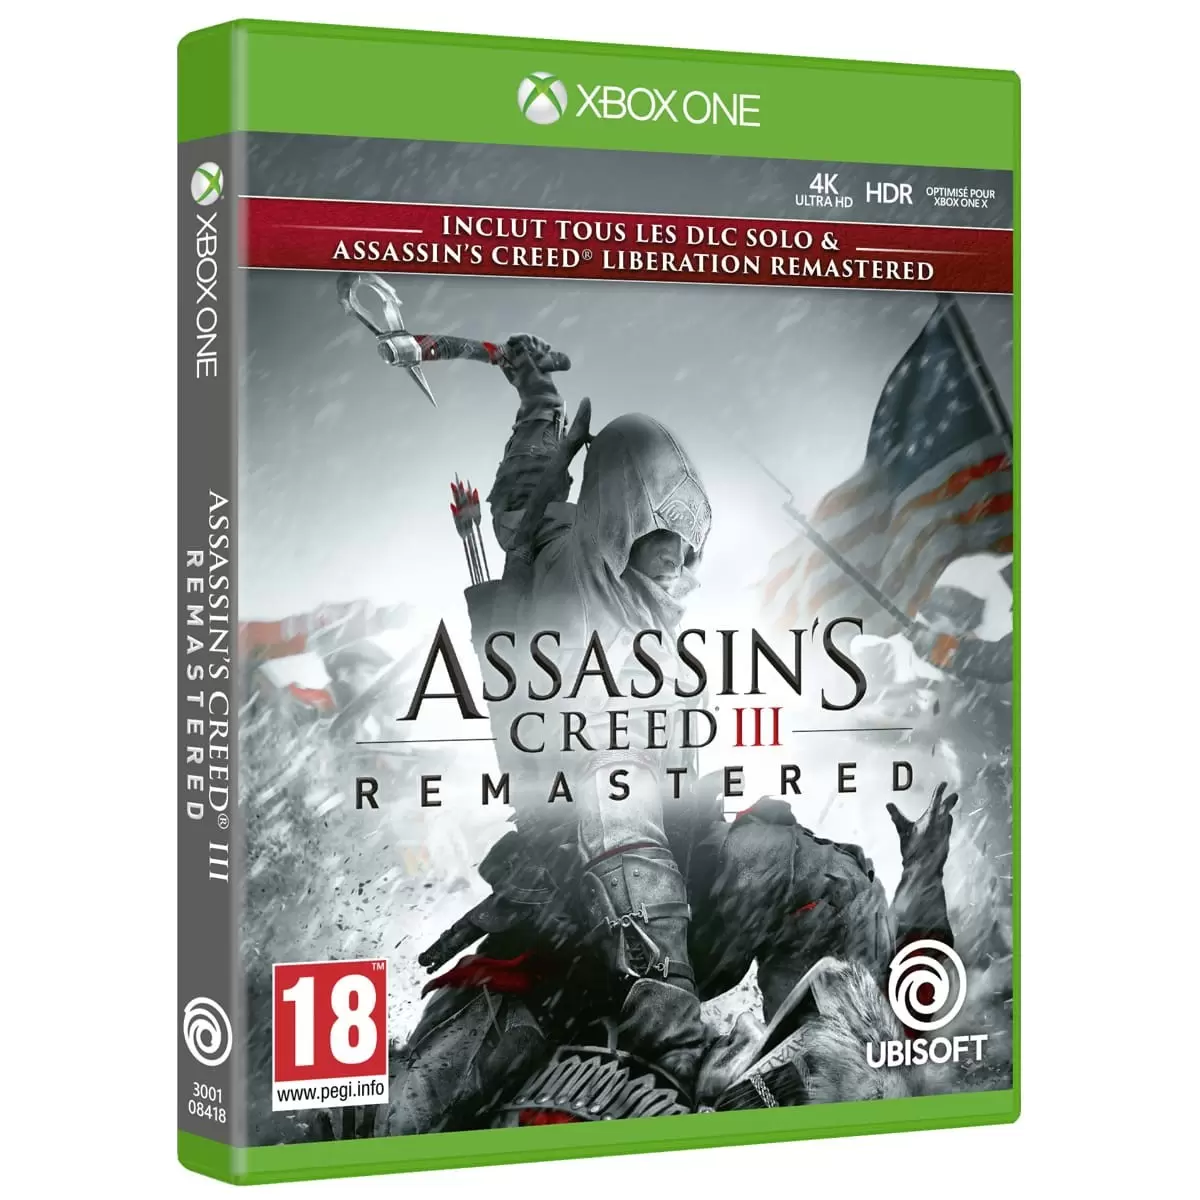 XBOX One Games - Assassin\'s Creed 3 + Assassin\'s Creed Libération Remastered